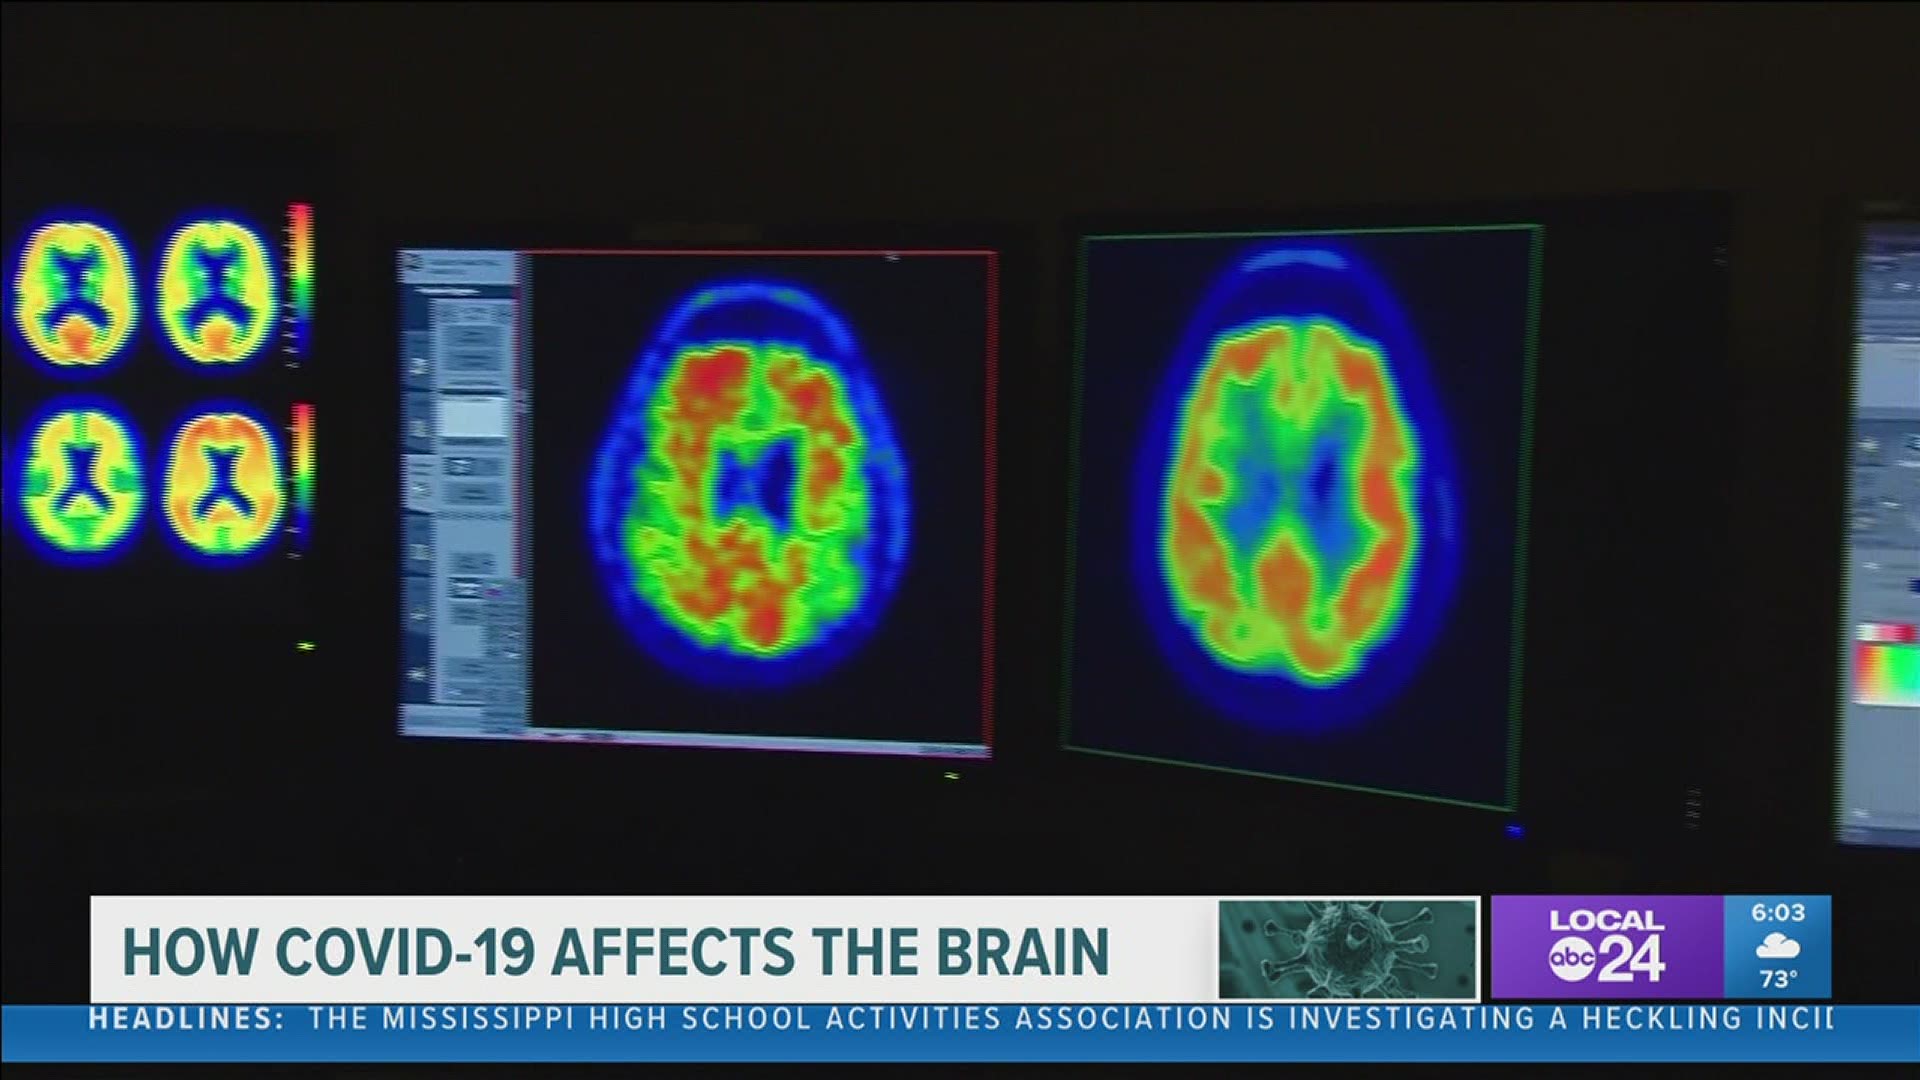 “The neurological stuff can be quite attention-getting for people,” said Dr. Stephen Threlkeld, Baptist Memorial Hospital Infectious Disease Medical Doctor.